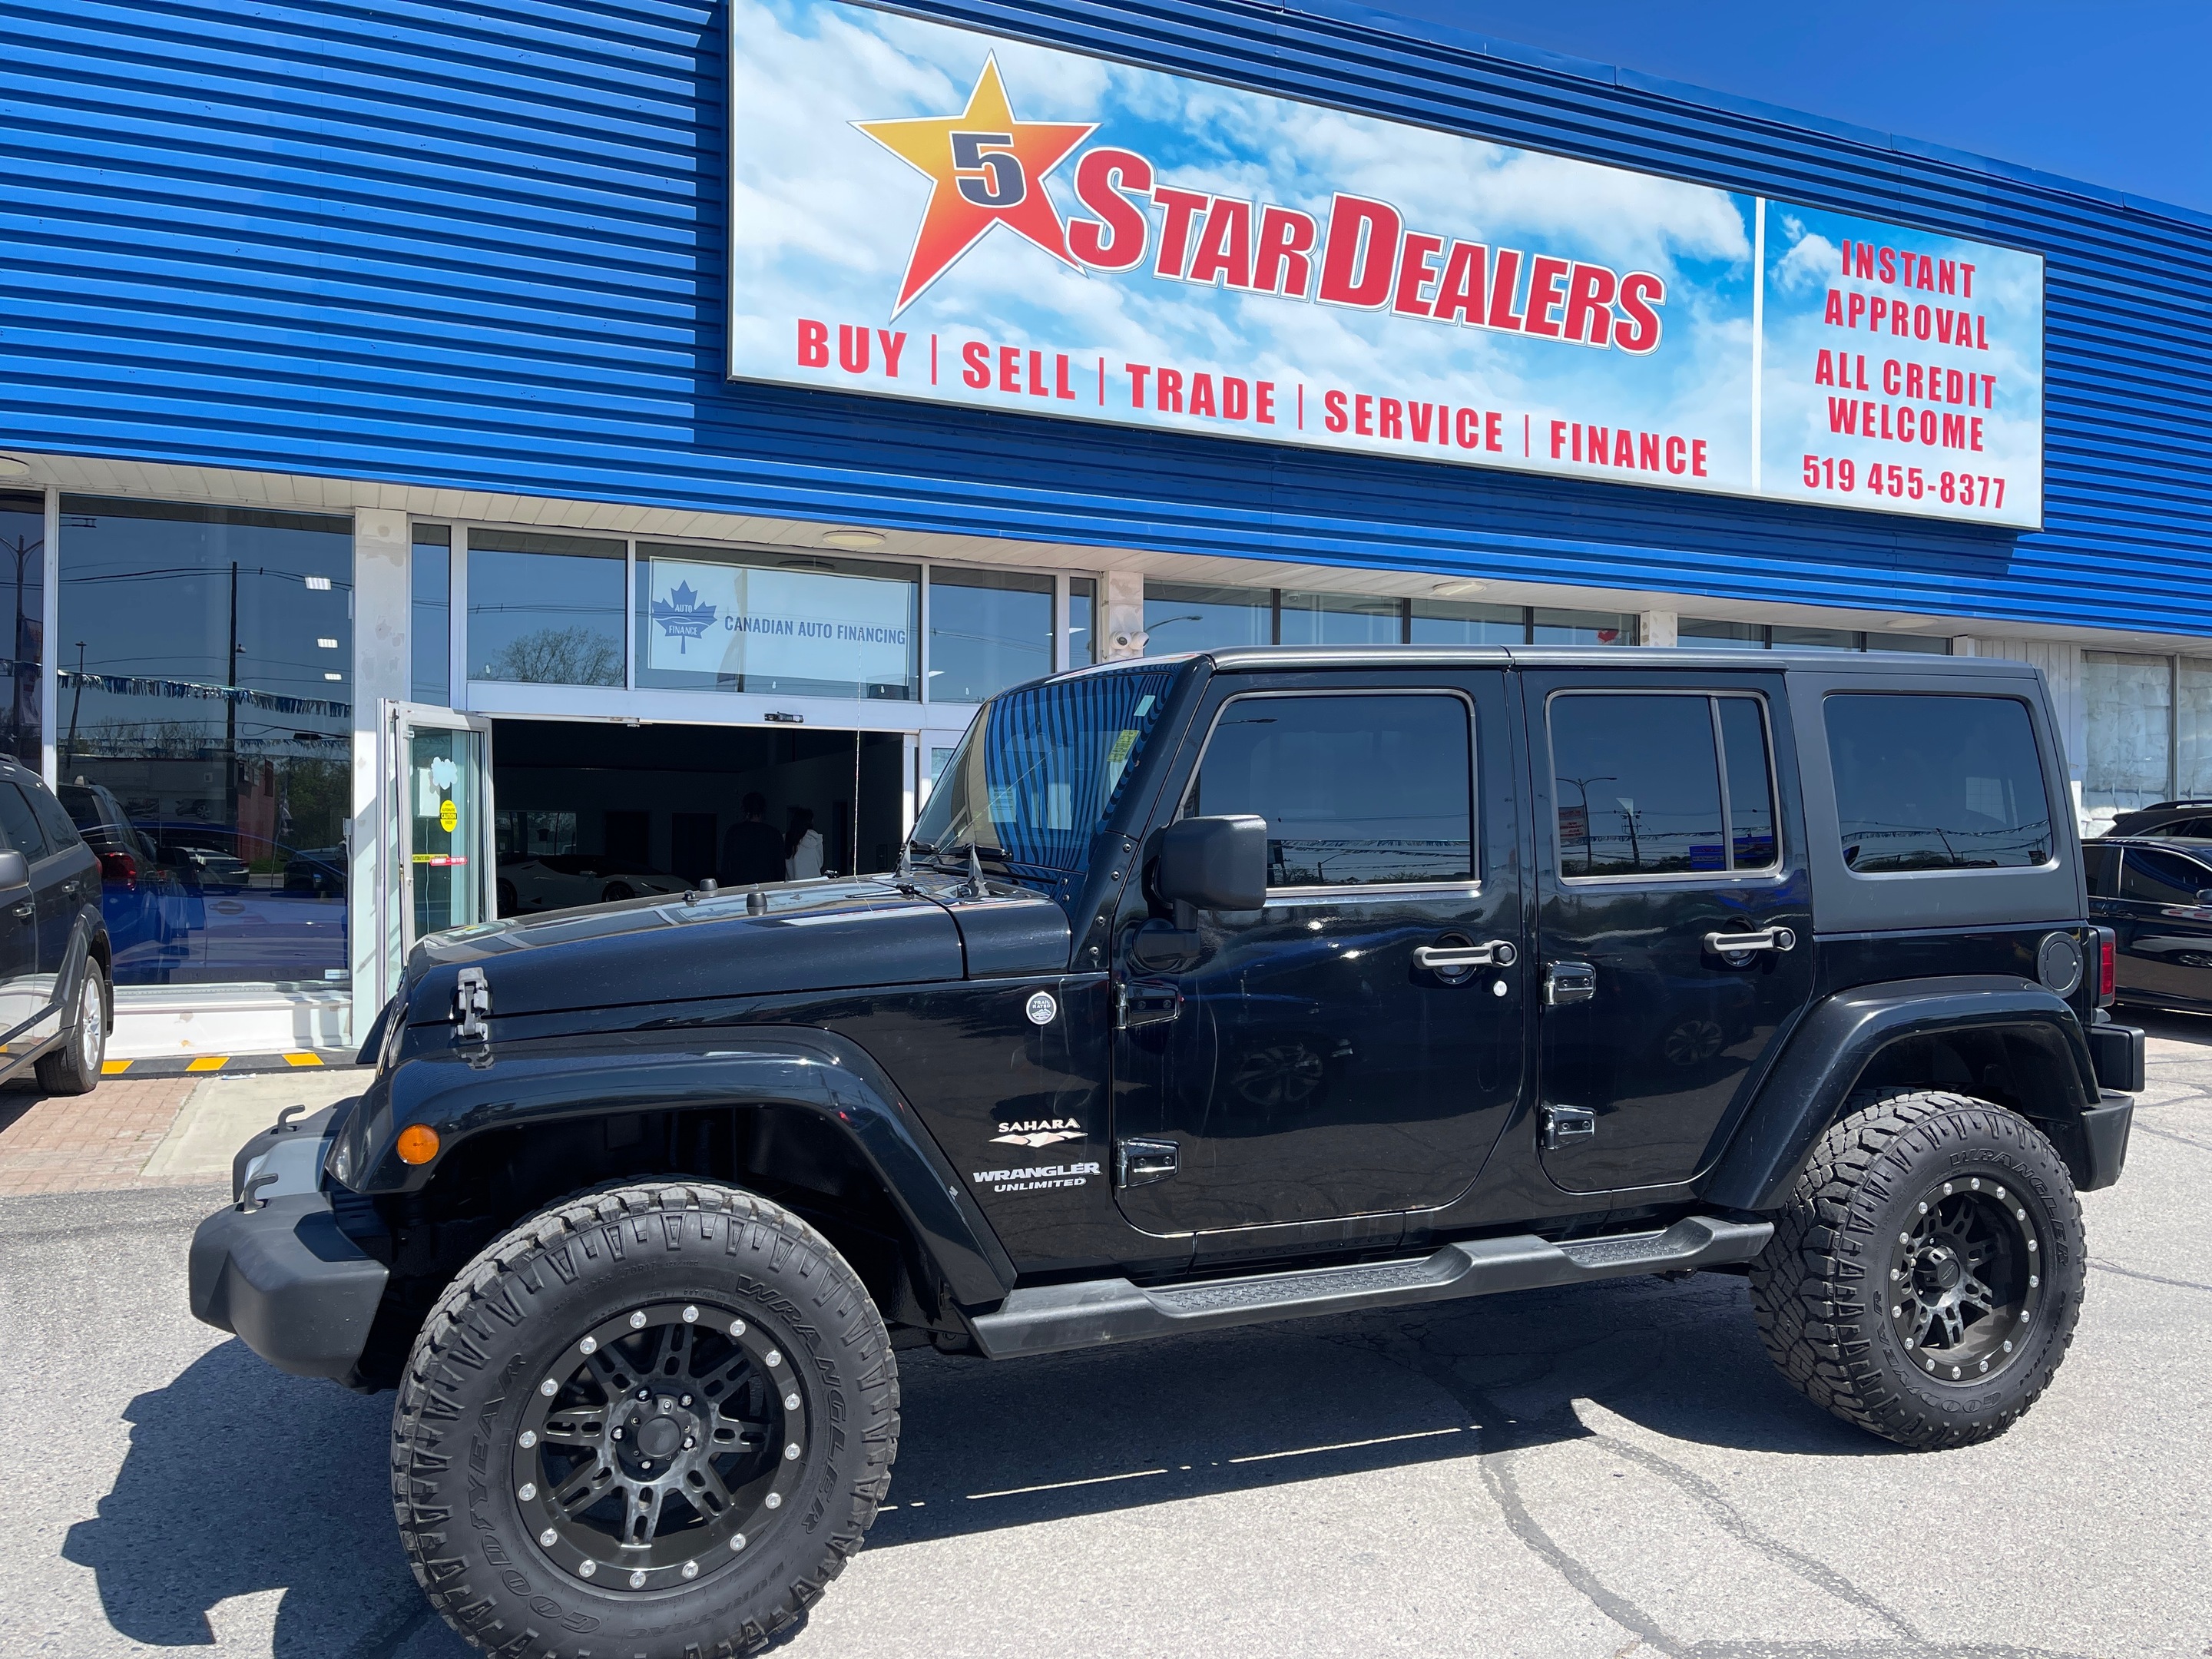 2013 Jeep WRANGLER UNLIMITED 4WD 4dr Sahara MINT! WE FINANCE ALL CREDIT!